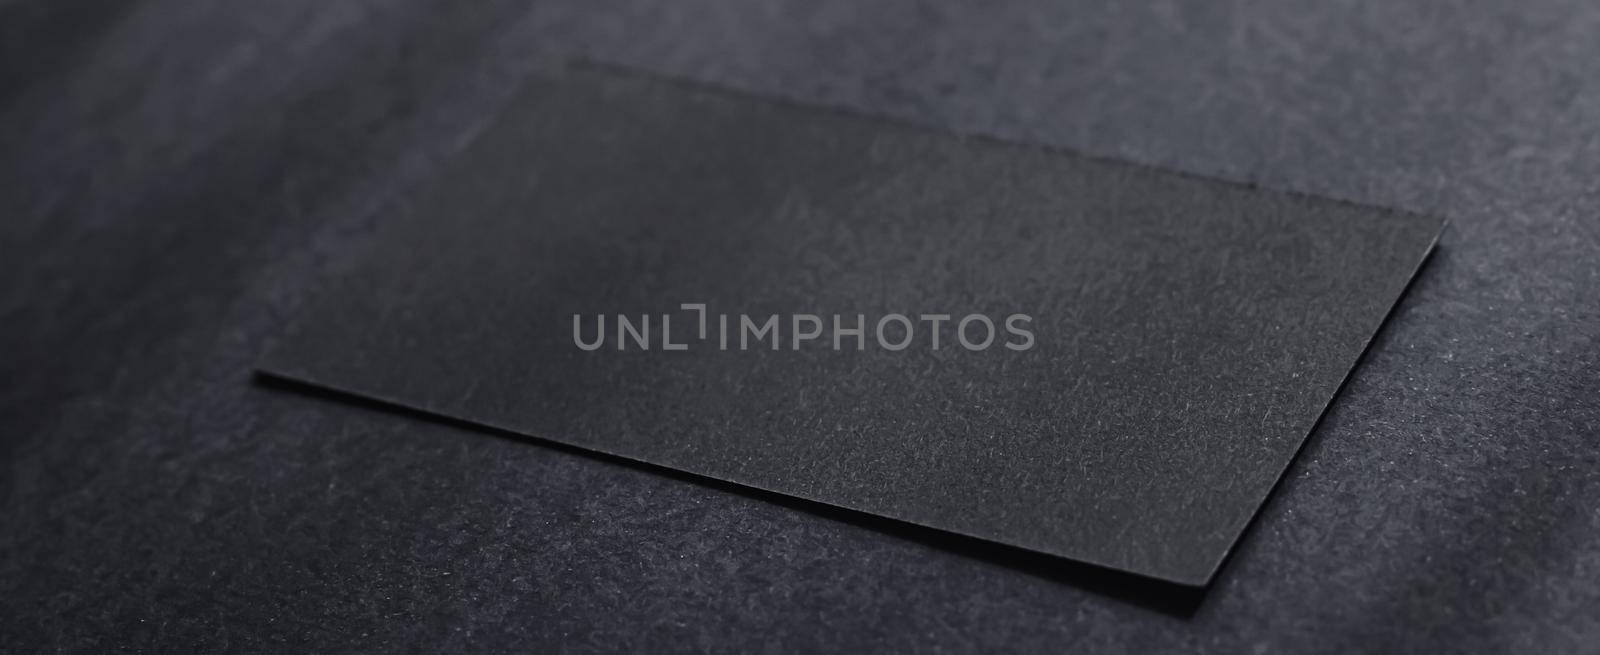 Black business card on dark flatlay background and sunlight shadows, luxury branding flat lay and brand identity design for mockup by Anneleven